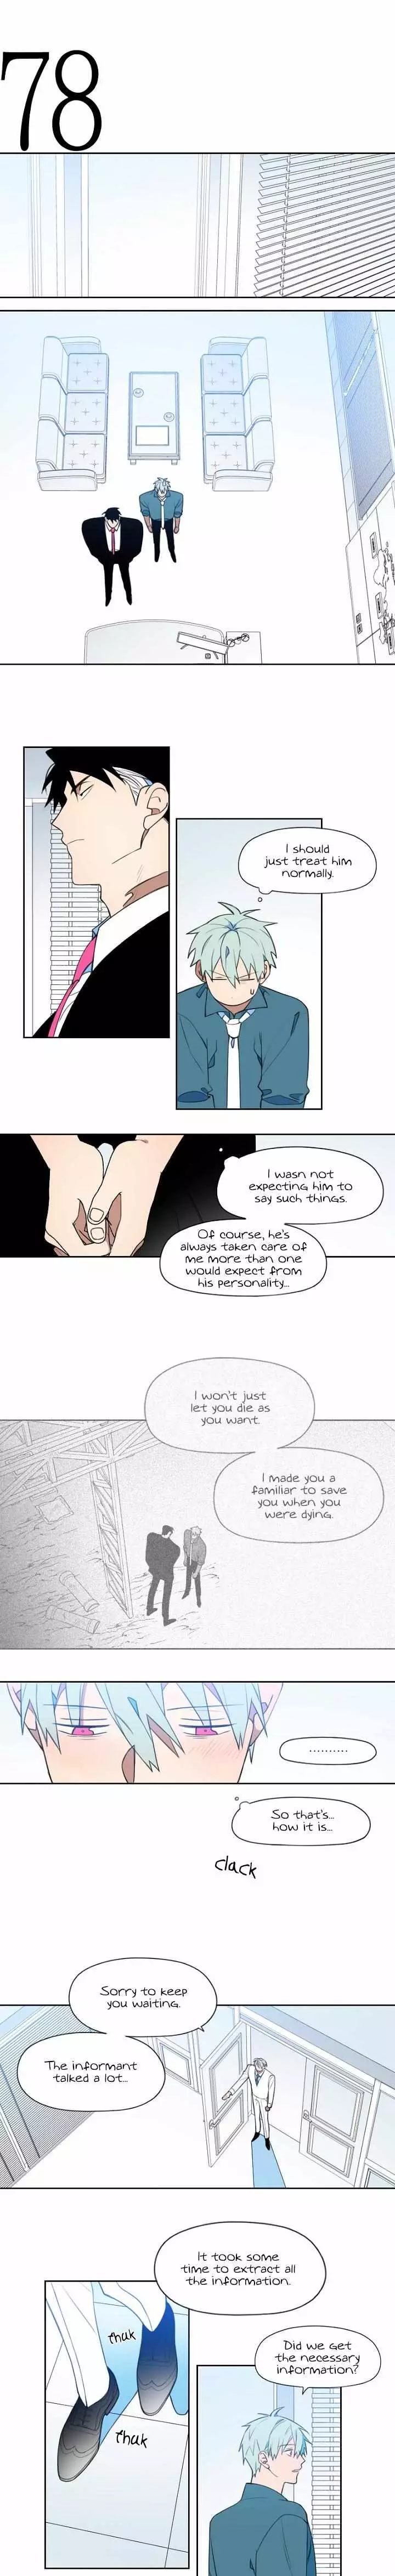 Kang Isae's Happy Ending - 44 page 5-e76d9e98